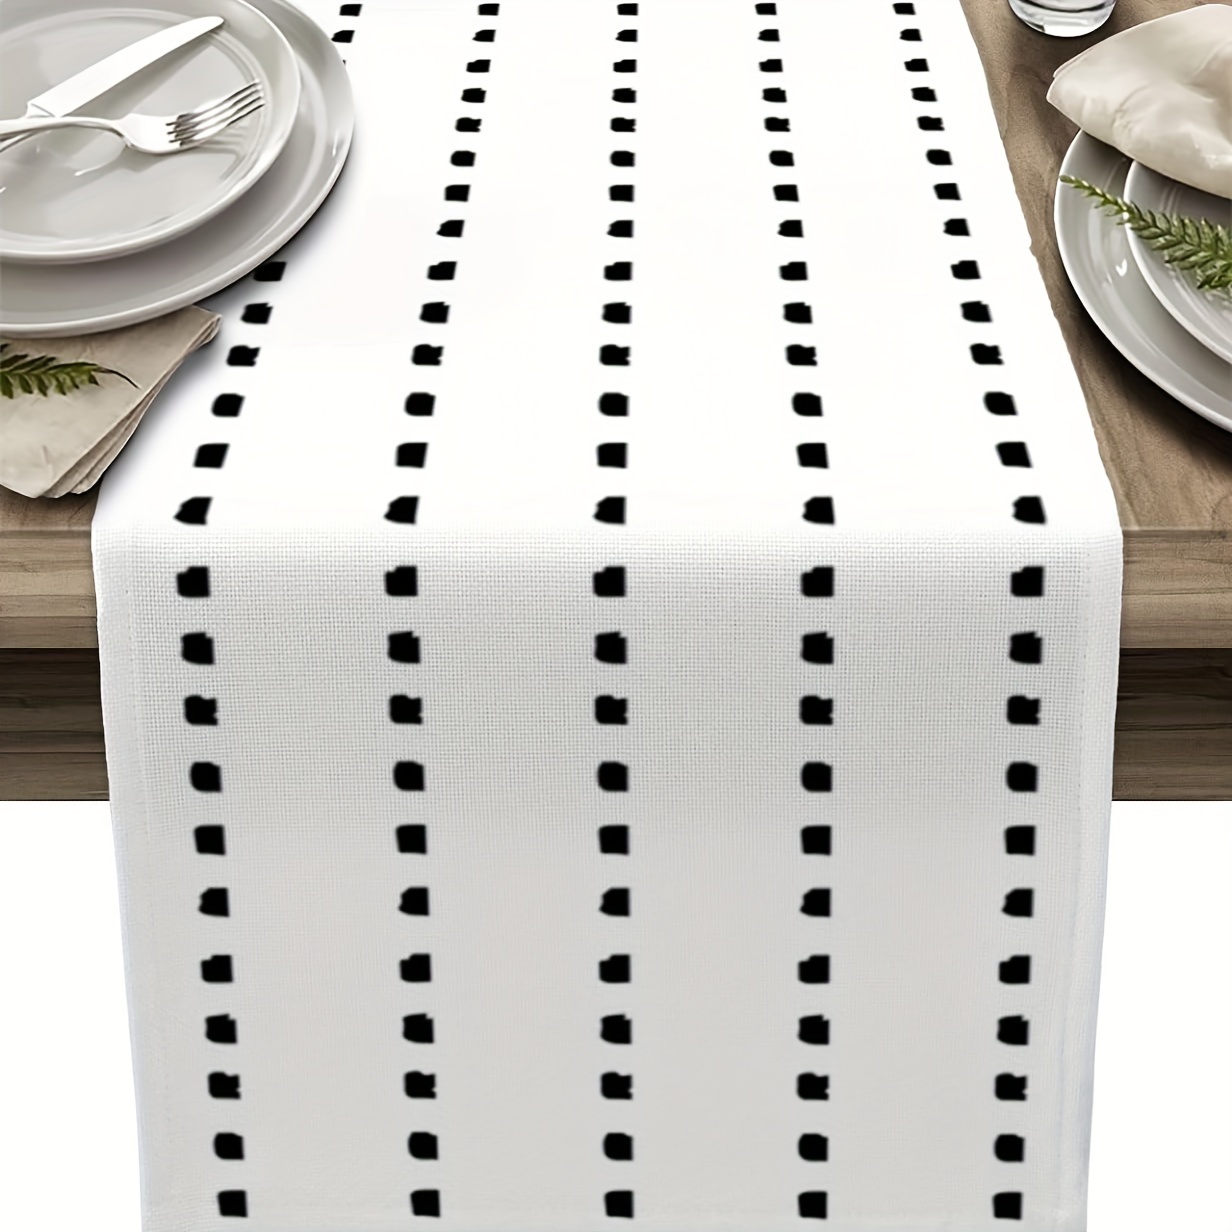 

1pc, Boho Style Table Runner, Black And White Geometric Polka Dots Printed Table Runner, Minimalist Burlap Linen Kitchen Dining Scarf, Party Decor